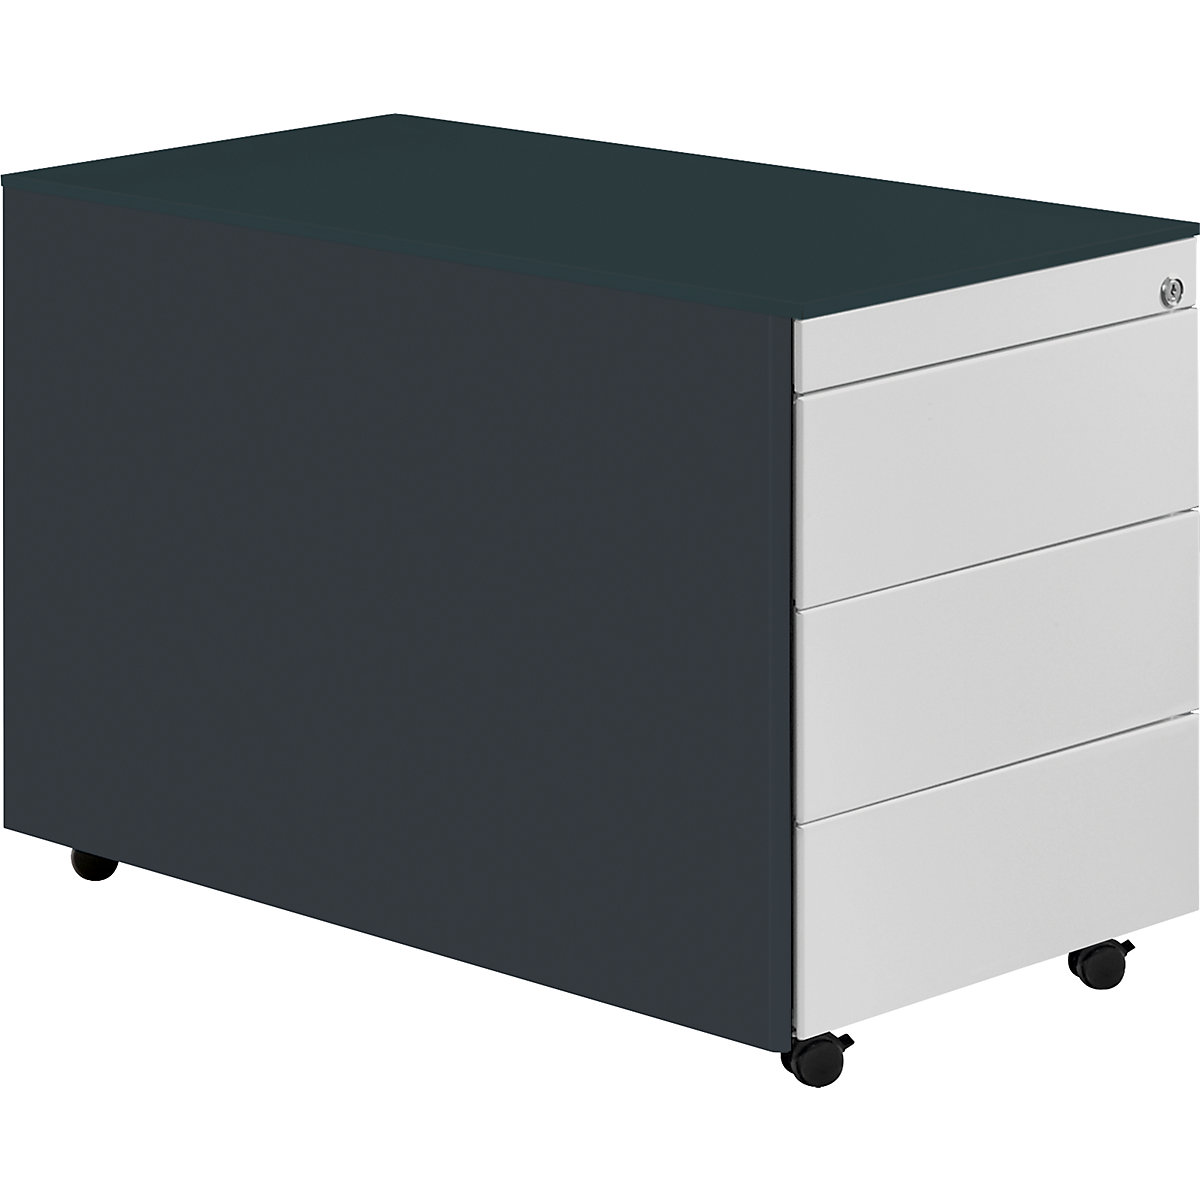 Drawer pedestal with castors – mauser, HxD 570 x 800 mm, steel top, 3 drawers, charcoal / light grey / charcoal-8